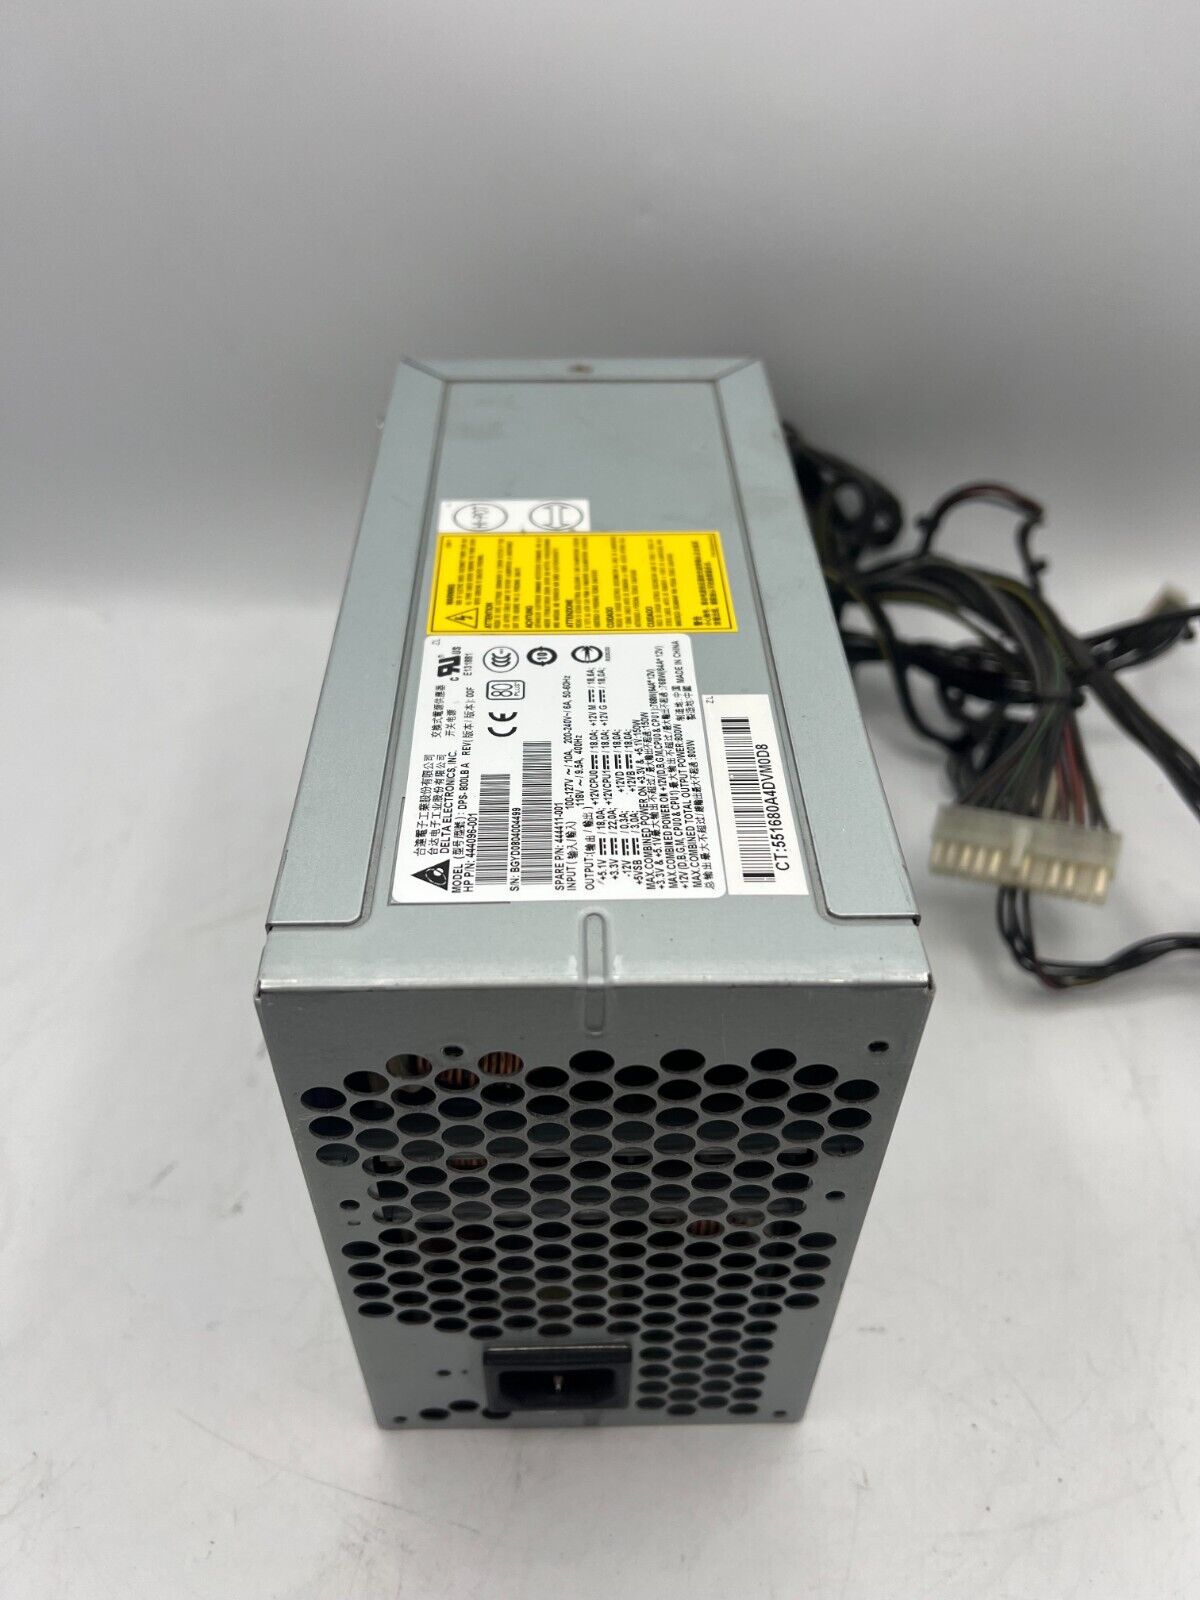 Delta Electronics DPS-800 LBA 444096-001 Power Supply For HP xw8600 Workstation